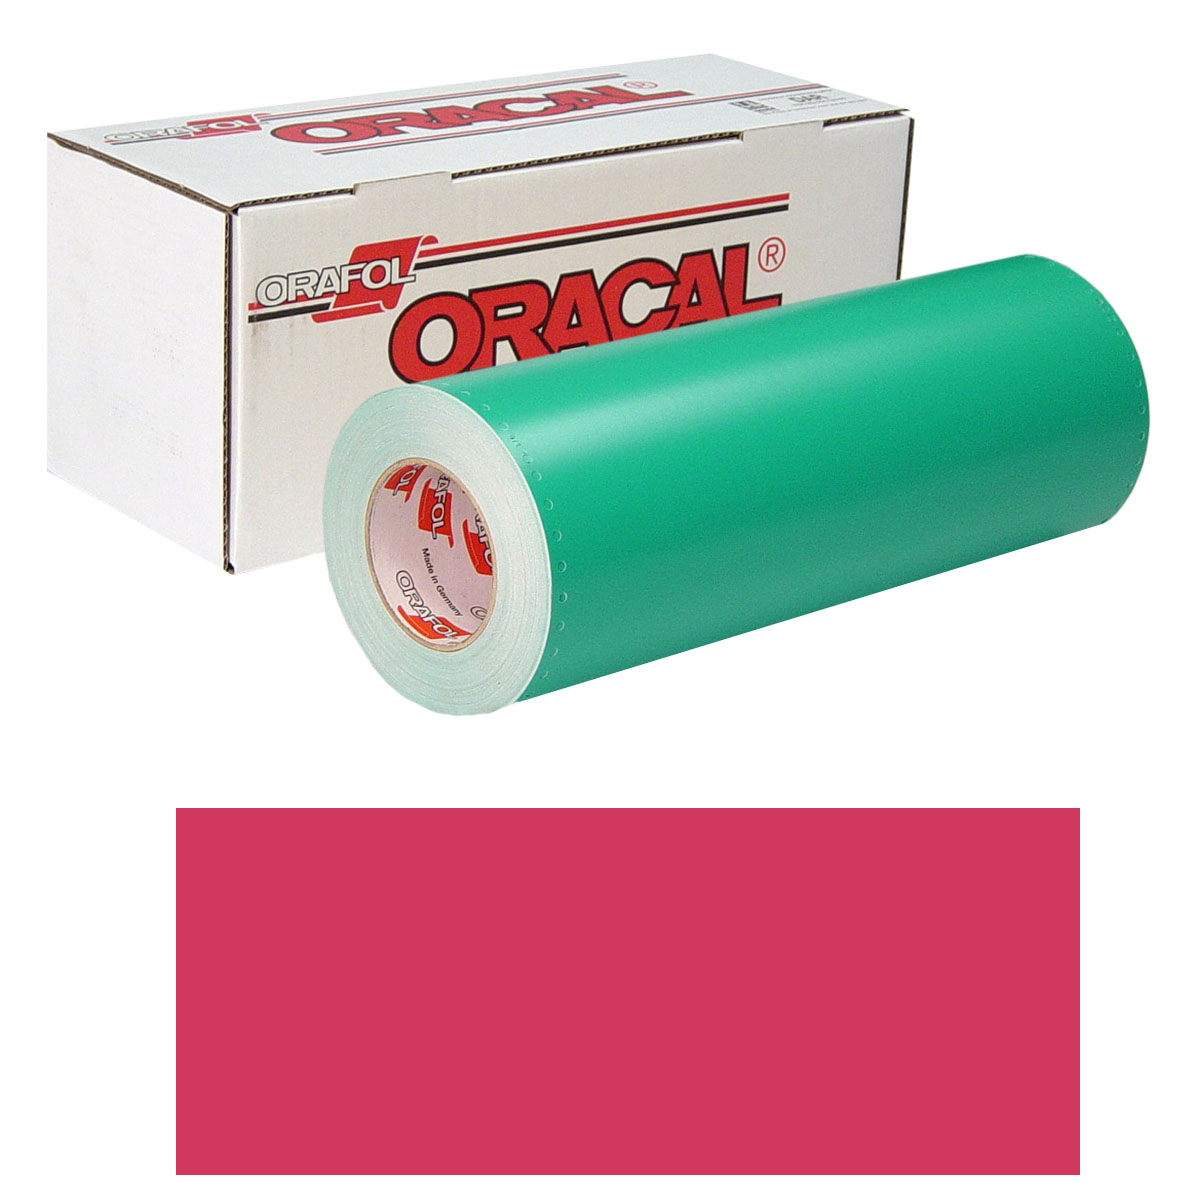 ORACAL 8500 15in X 50yd 032 Light Red